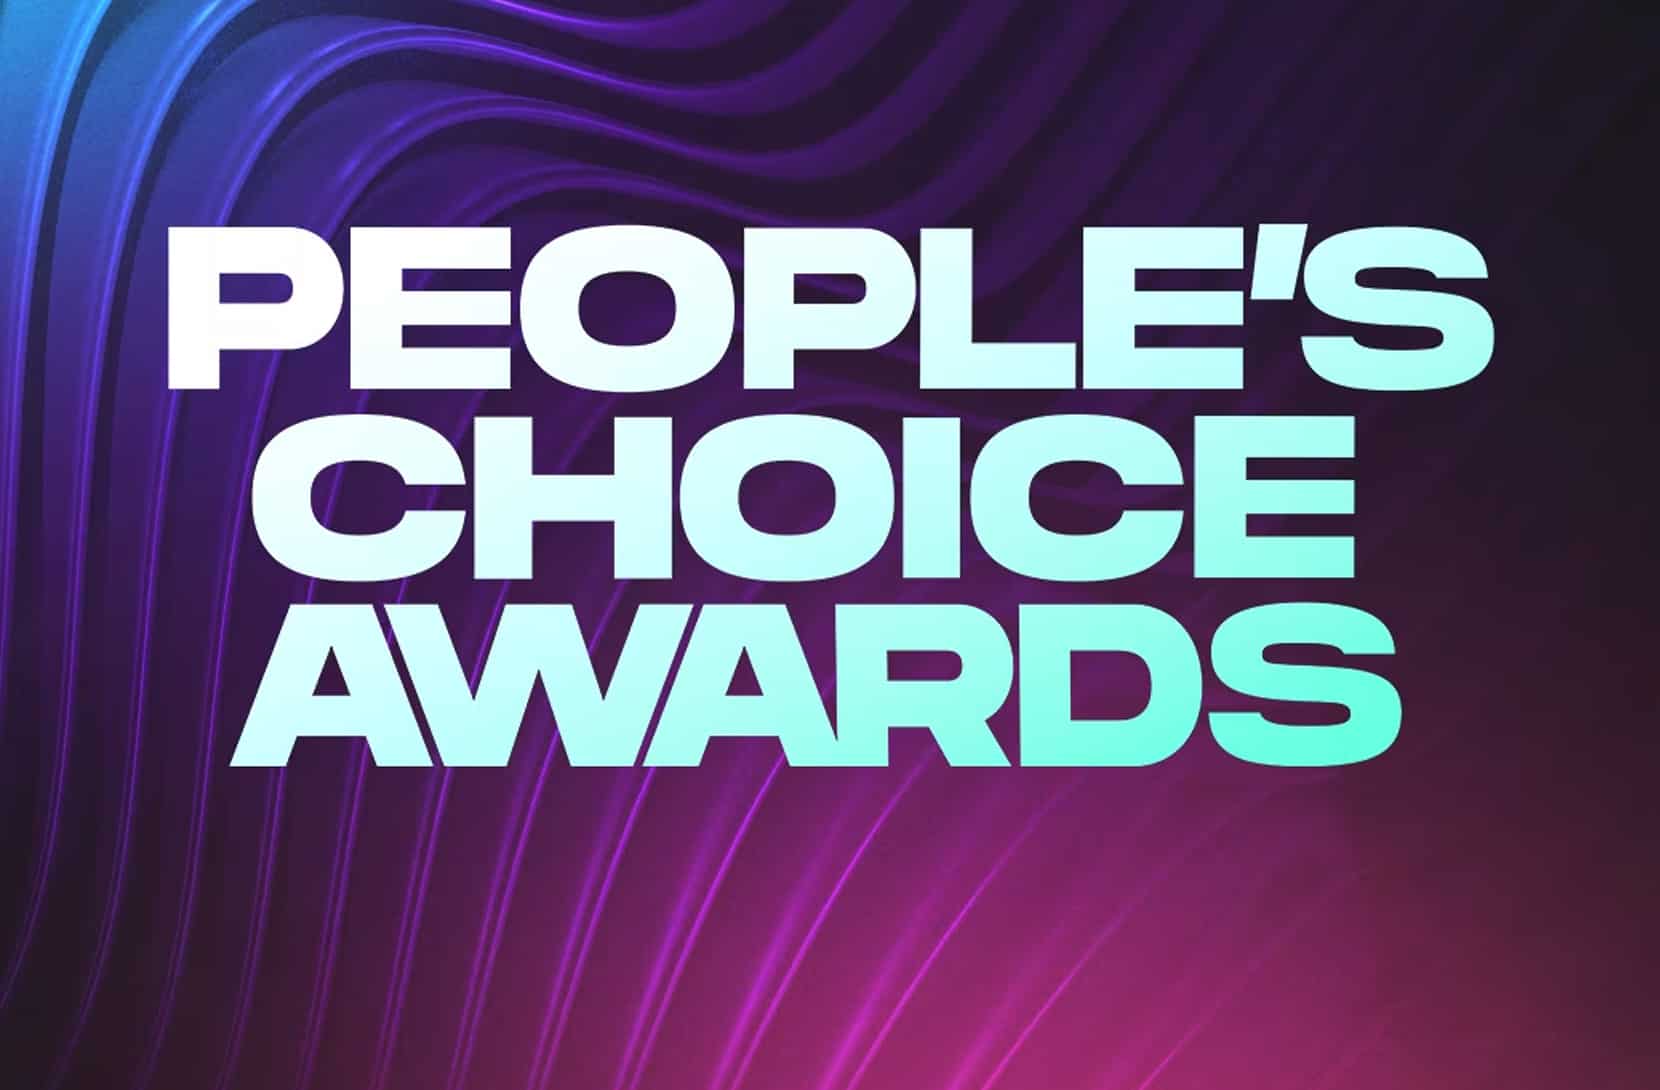 The People’s Choice Awards logo from E!